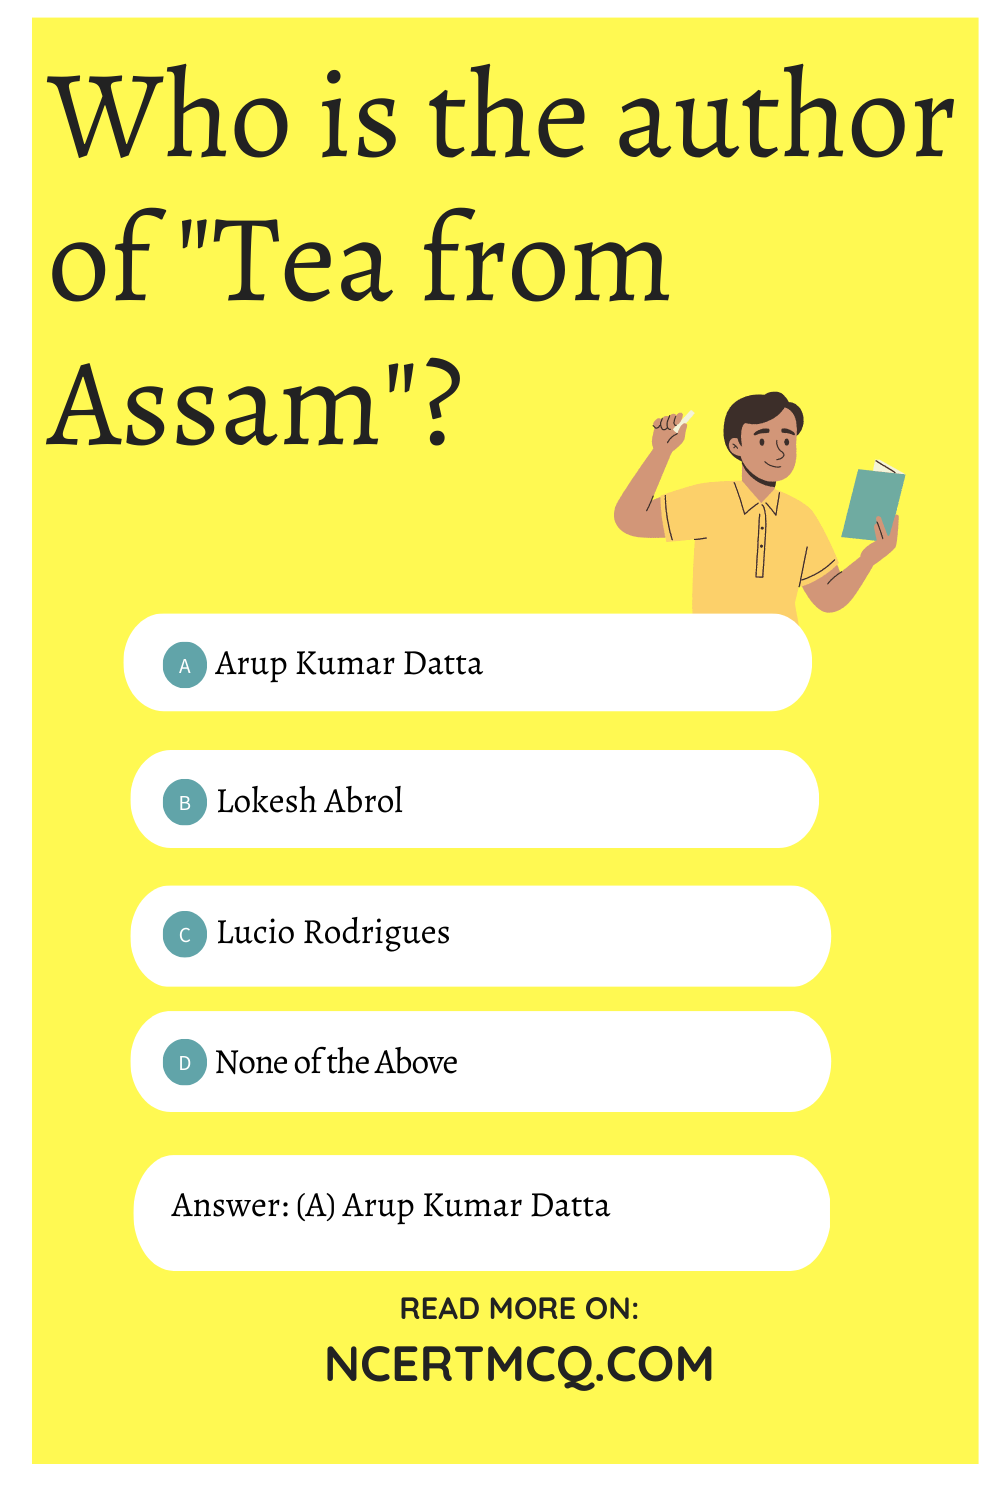 Who is the author of "Tea from Assam"?